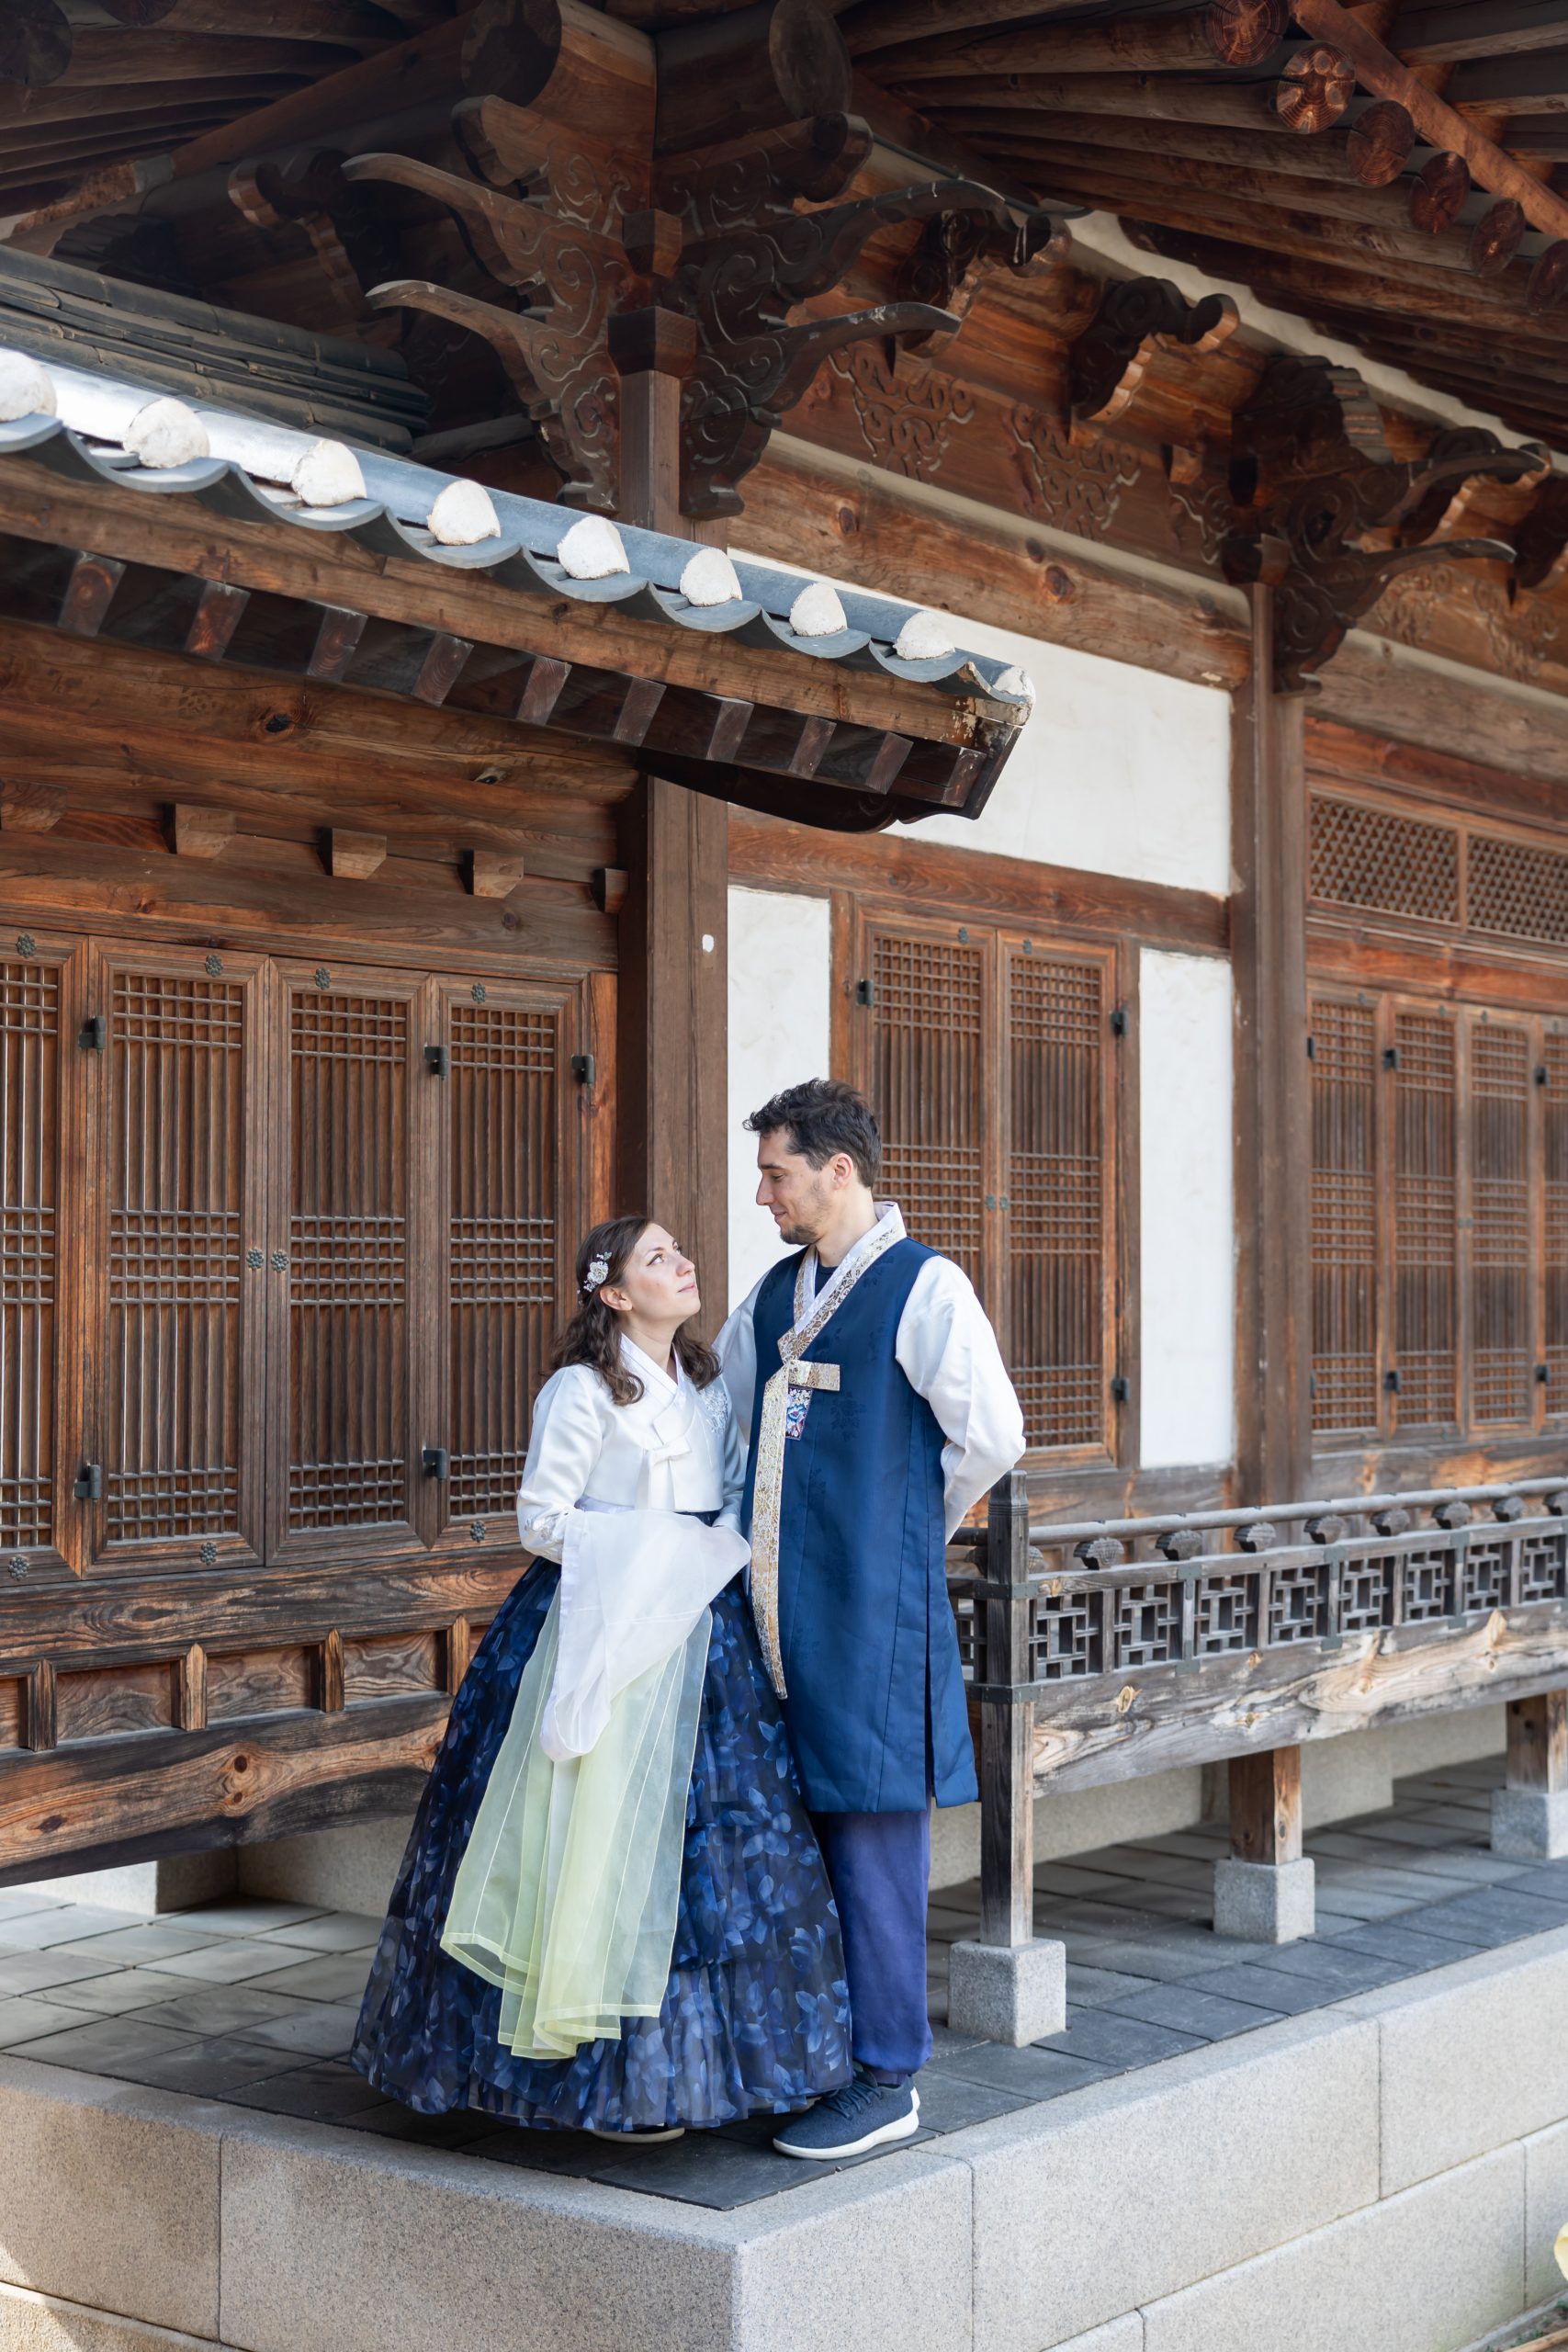 Cory and Greg wearing a Hanbok and enjoying their photoshoot in Seoul